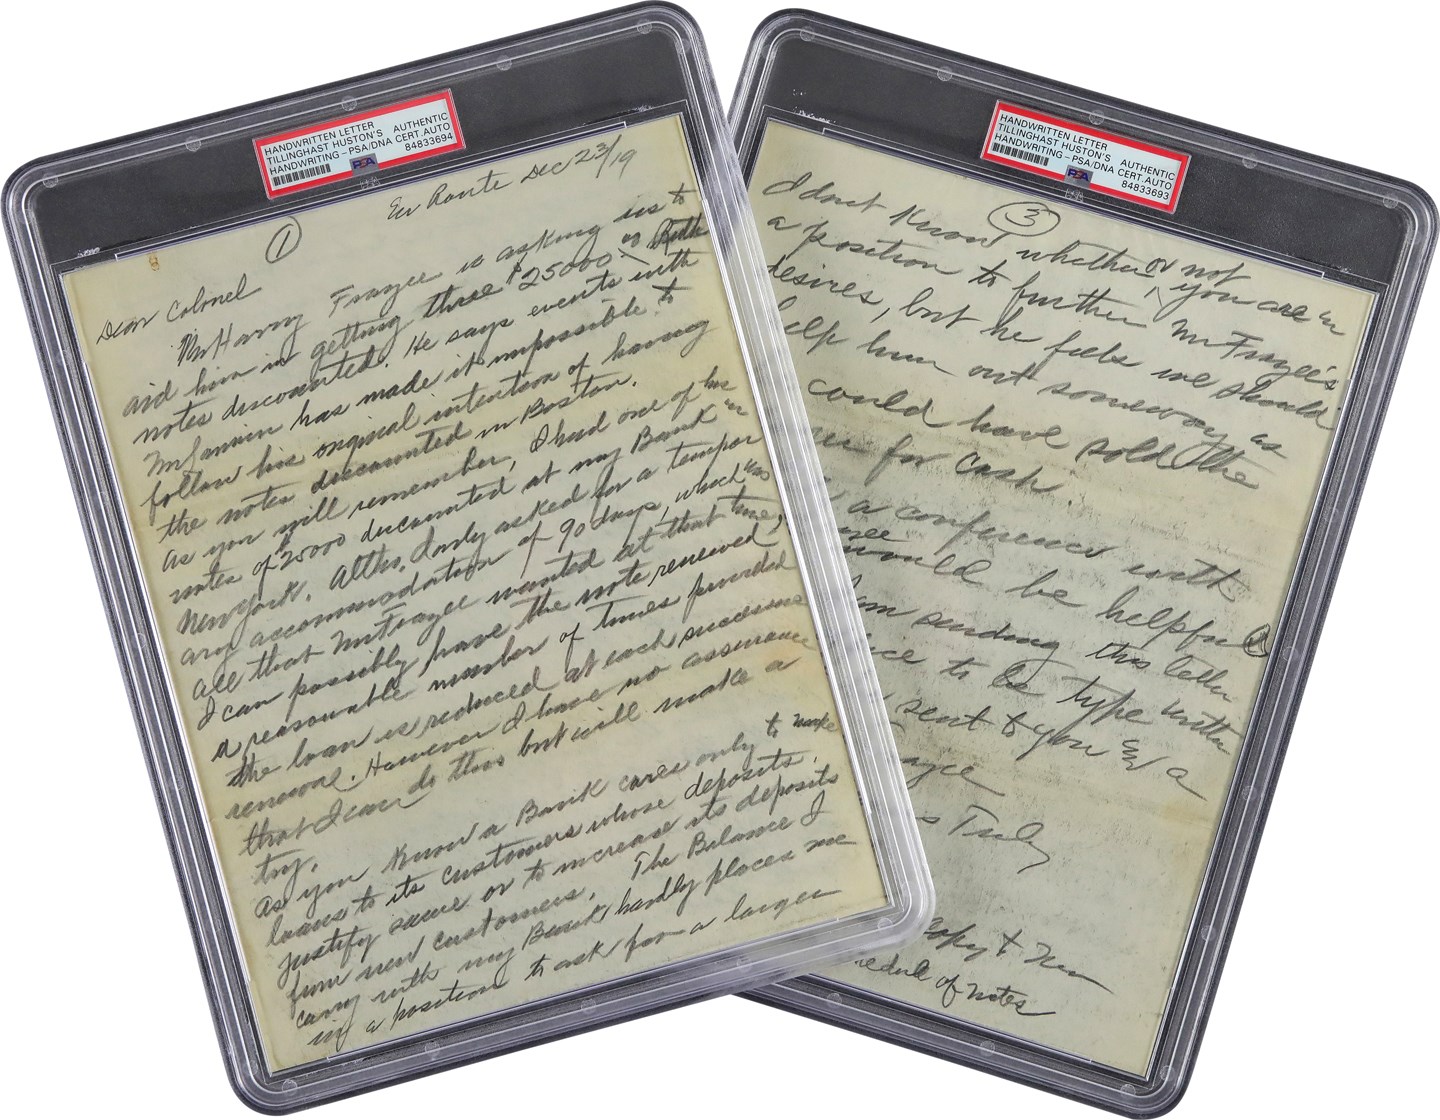 - February 25, 1920, Colonel Tillinghast Huston Handwritten Letter to Jacob Ruppert Regarding The Sale of Babe Ruth - From The Barry Halper Collection (PSA)